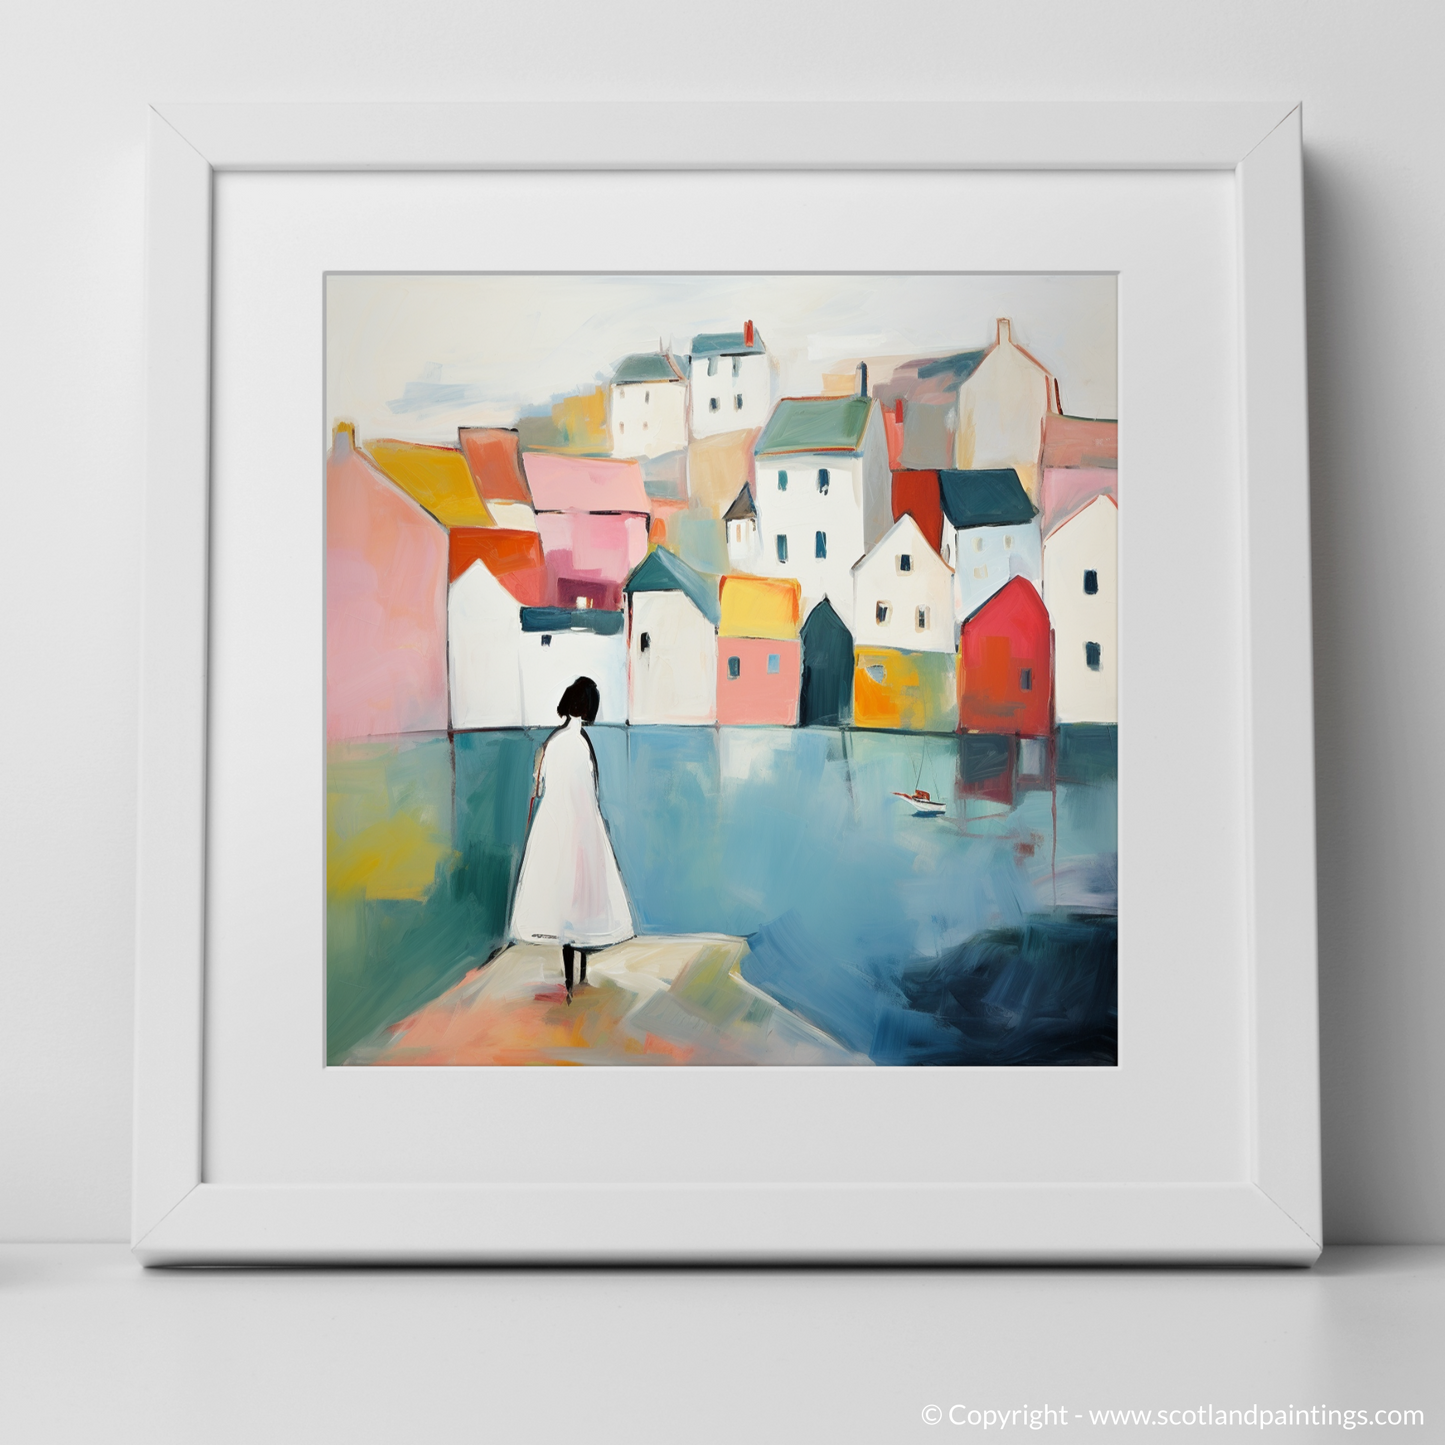 Harbour Haven: An Abstract Gaze from Portree's Edge